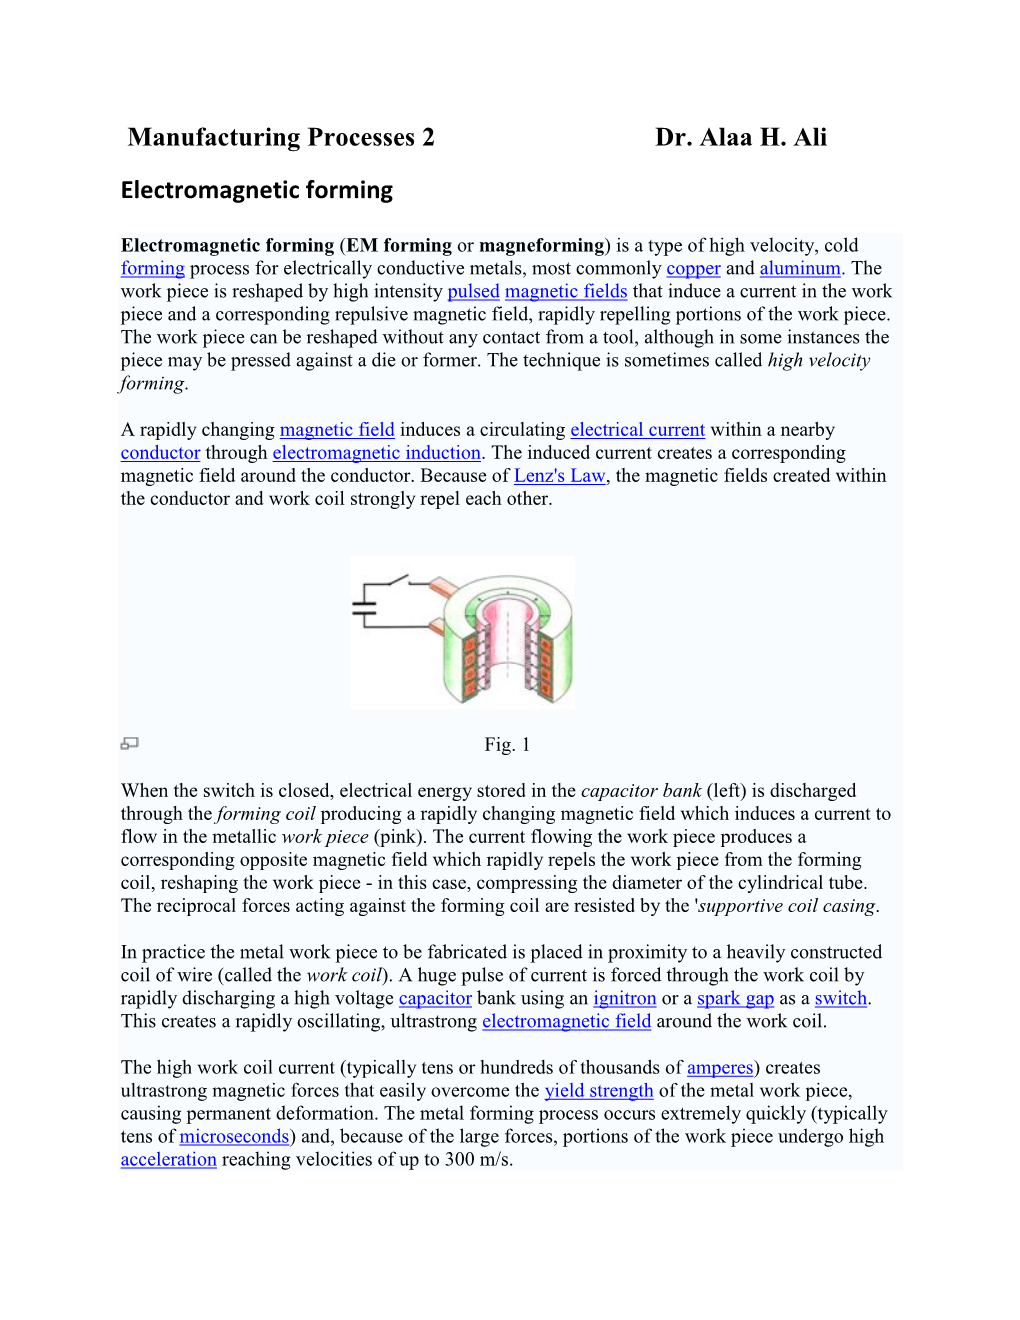 Manufacturing Processes 2 Dr. Alaa H. Ali Electromagnetic Forming